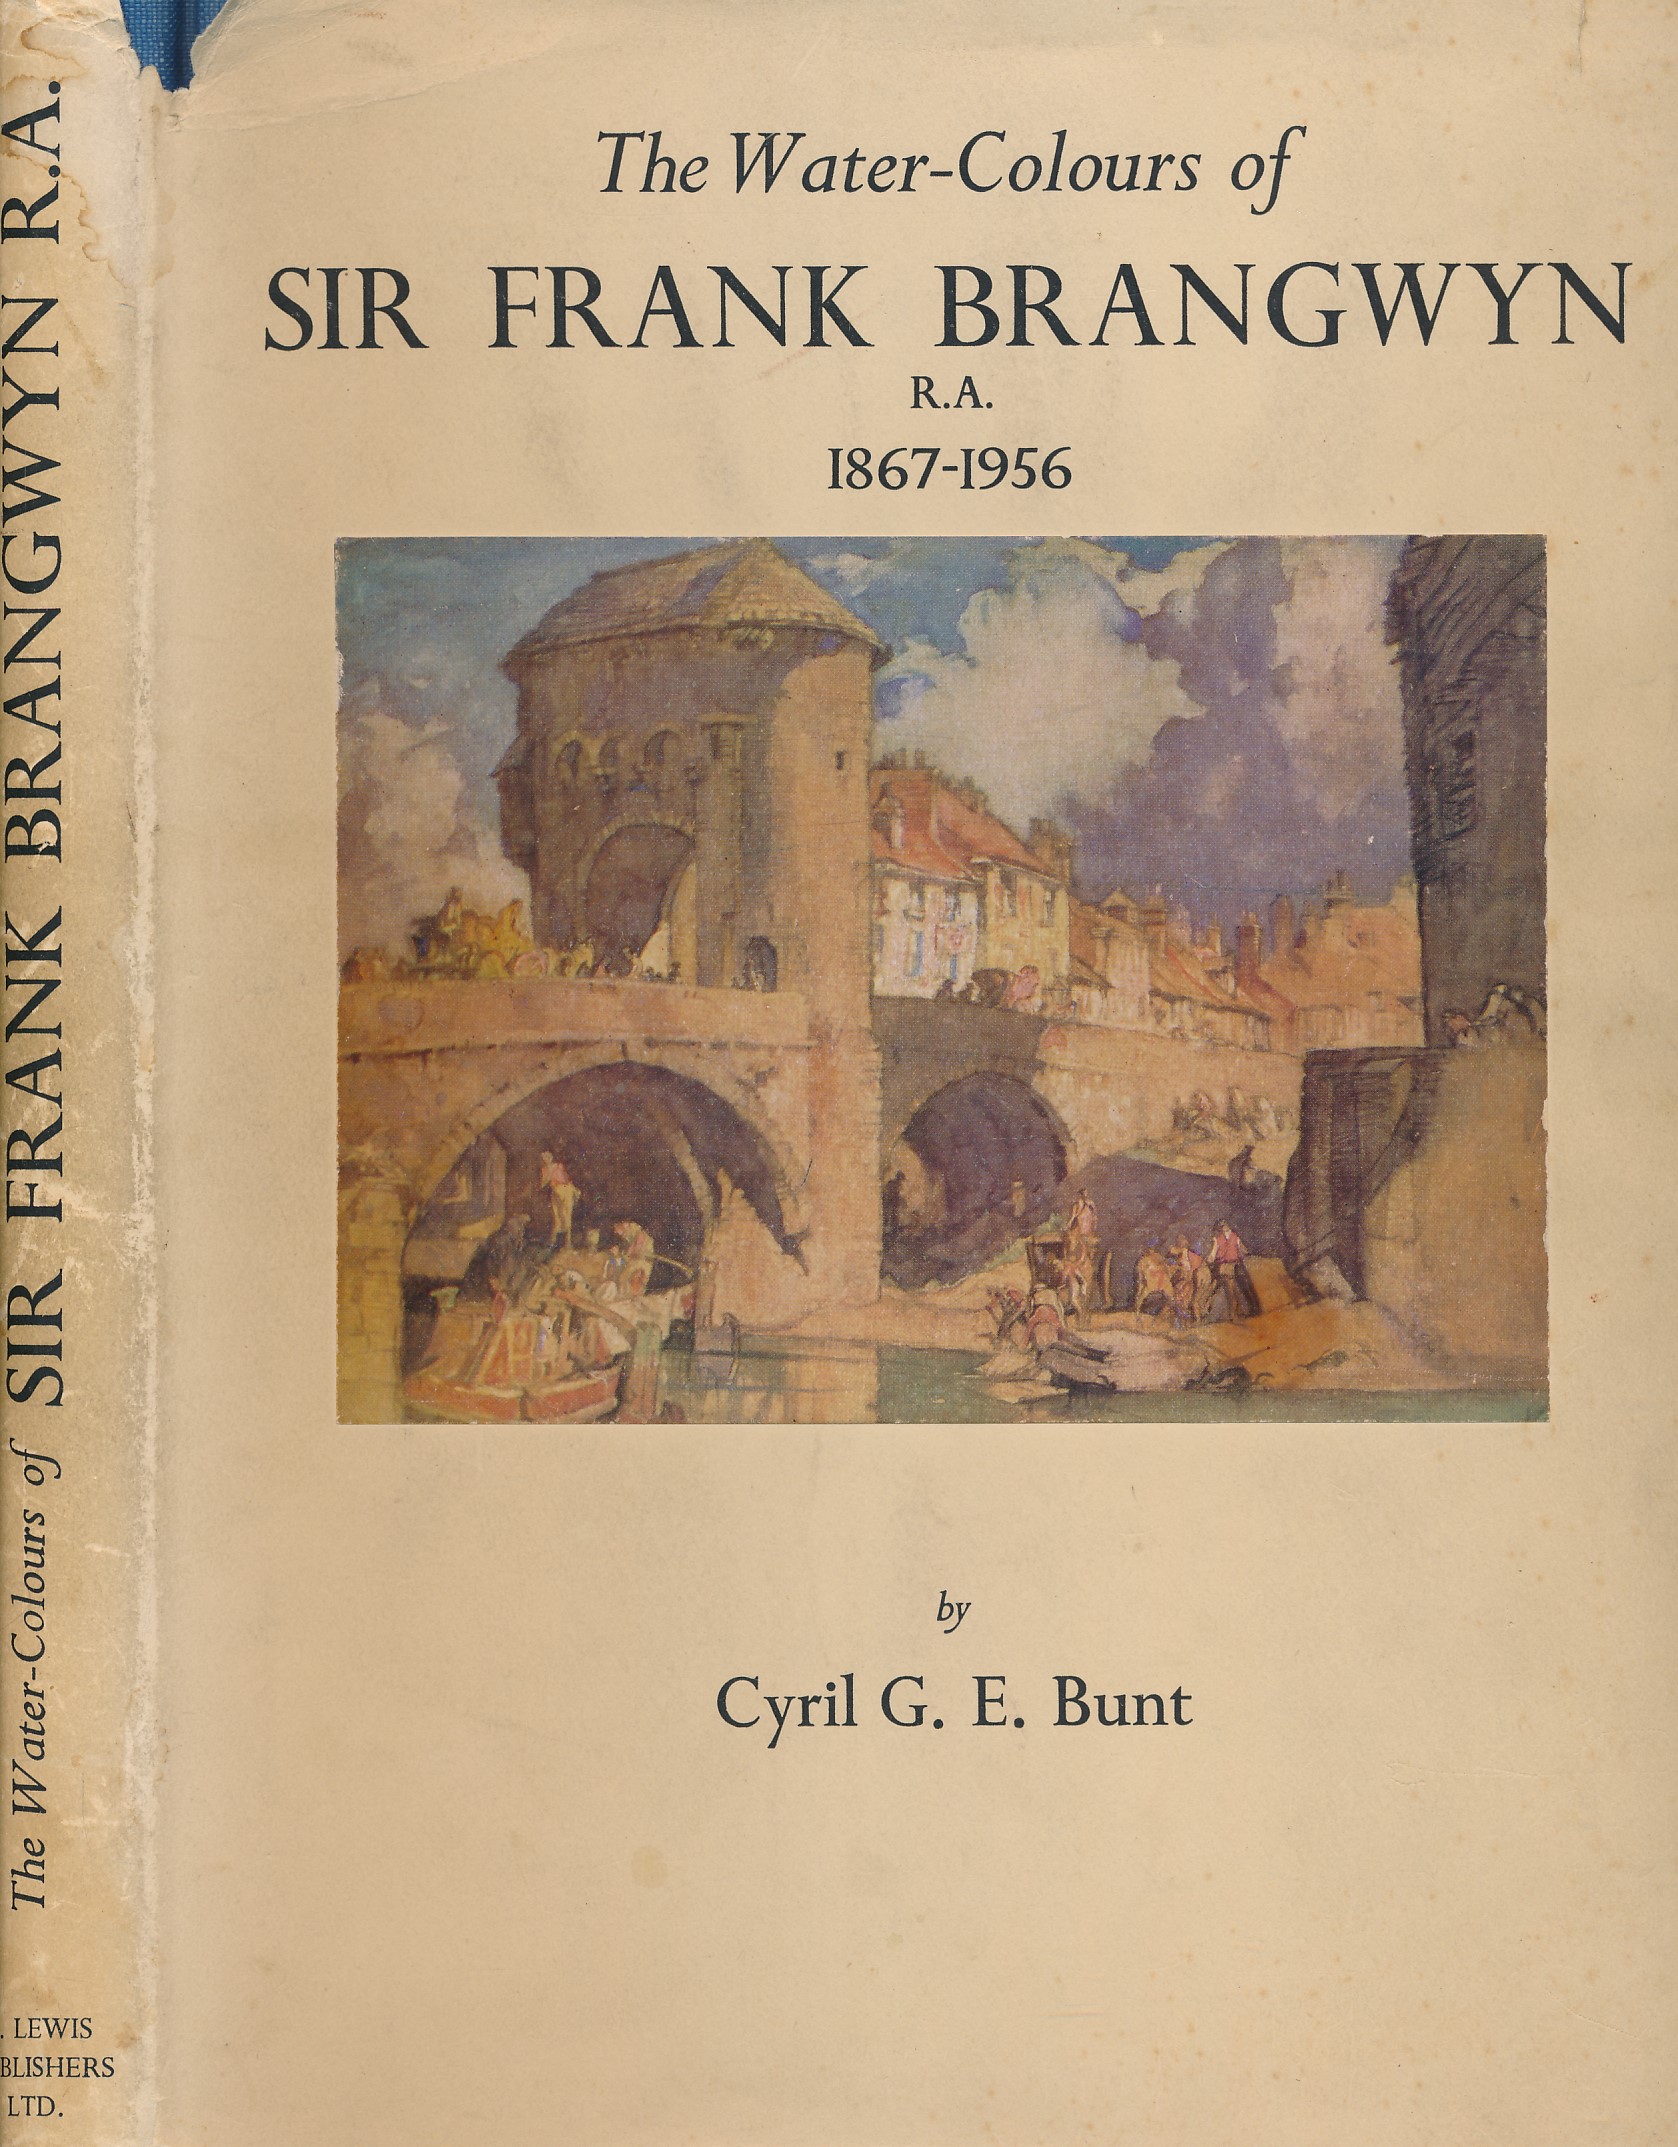 The Water-Colours of Sir Frank Brangwyn R.A. 1867-1956. Special Limited Edition